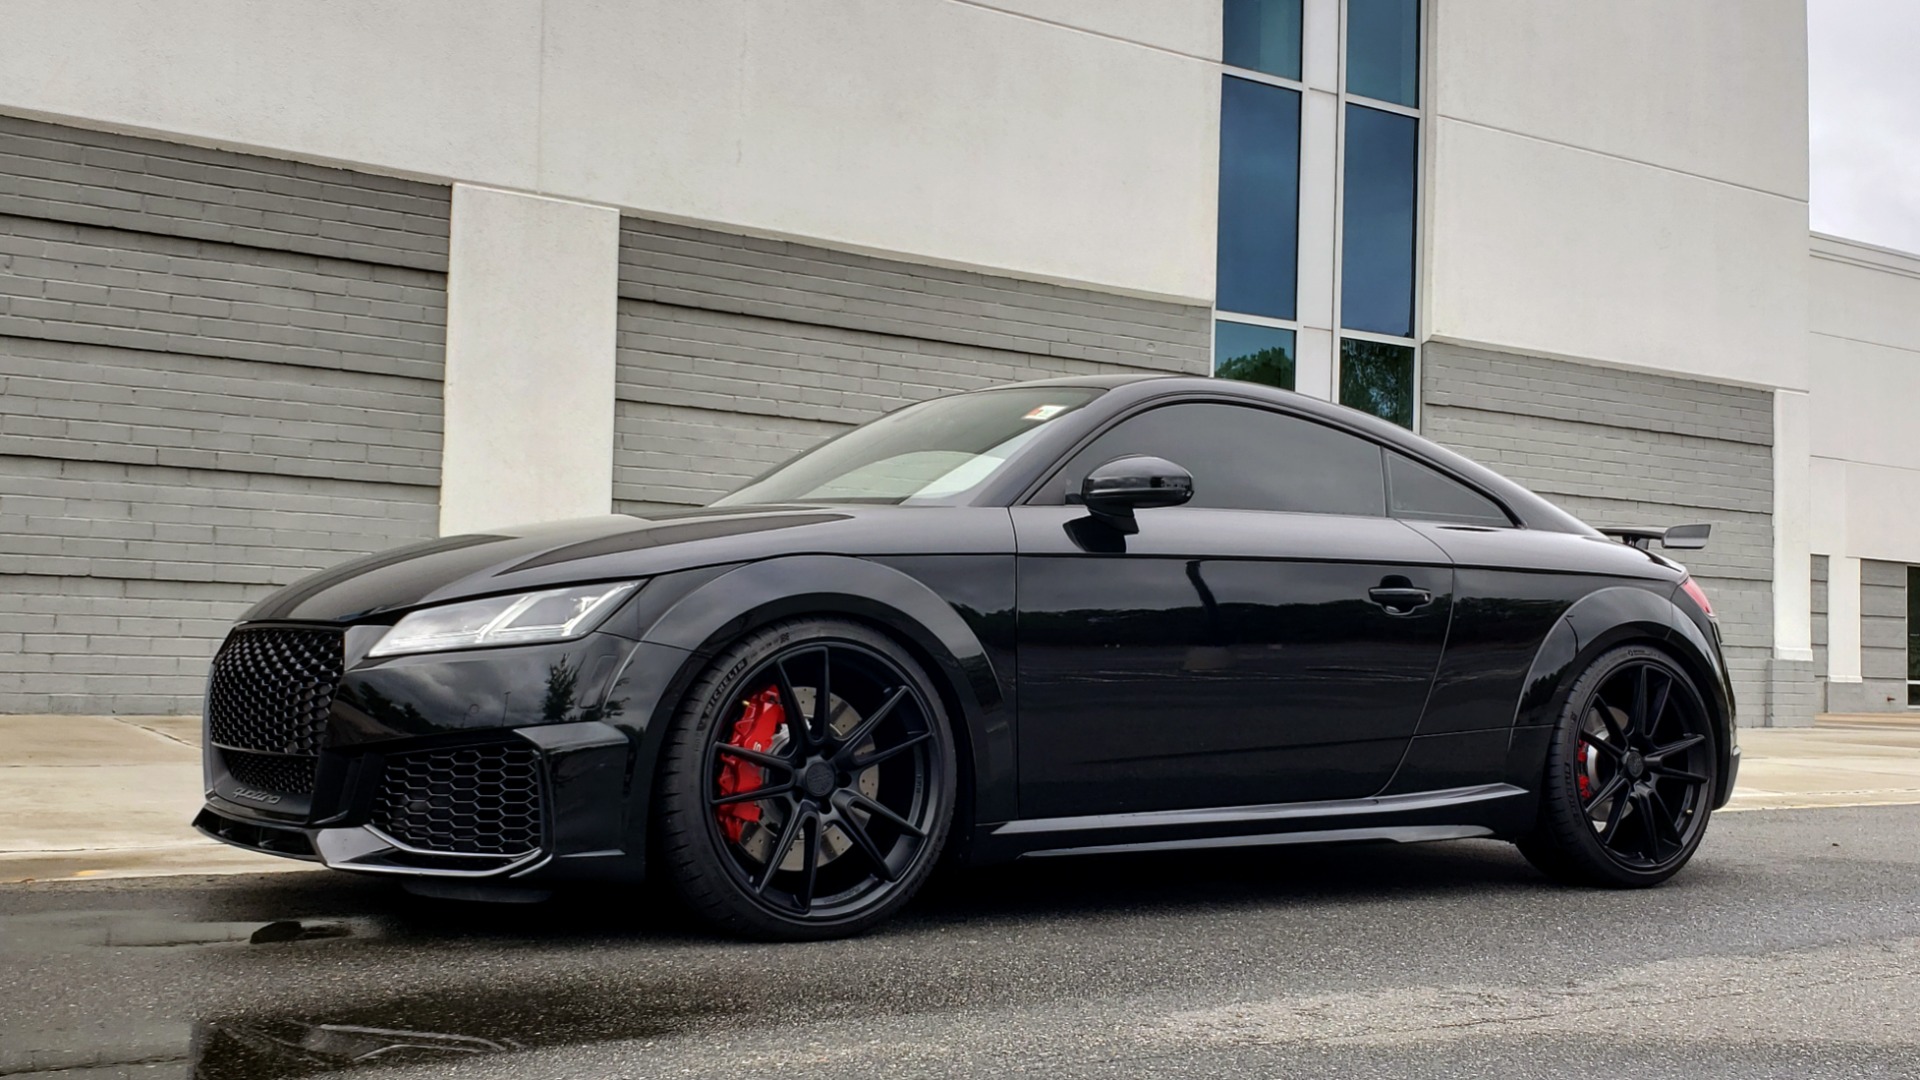 Used 2019 Audi TT RS 2.5L / QUATTRO / RS DESIGN / TECH / DYNAMIC / BLACK OPTIC / CARB for sale Sold at Formula Imports in Charlotte NC 28227 5